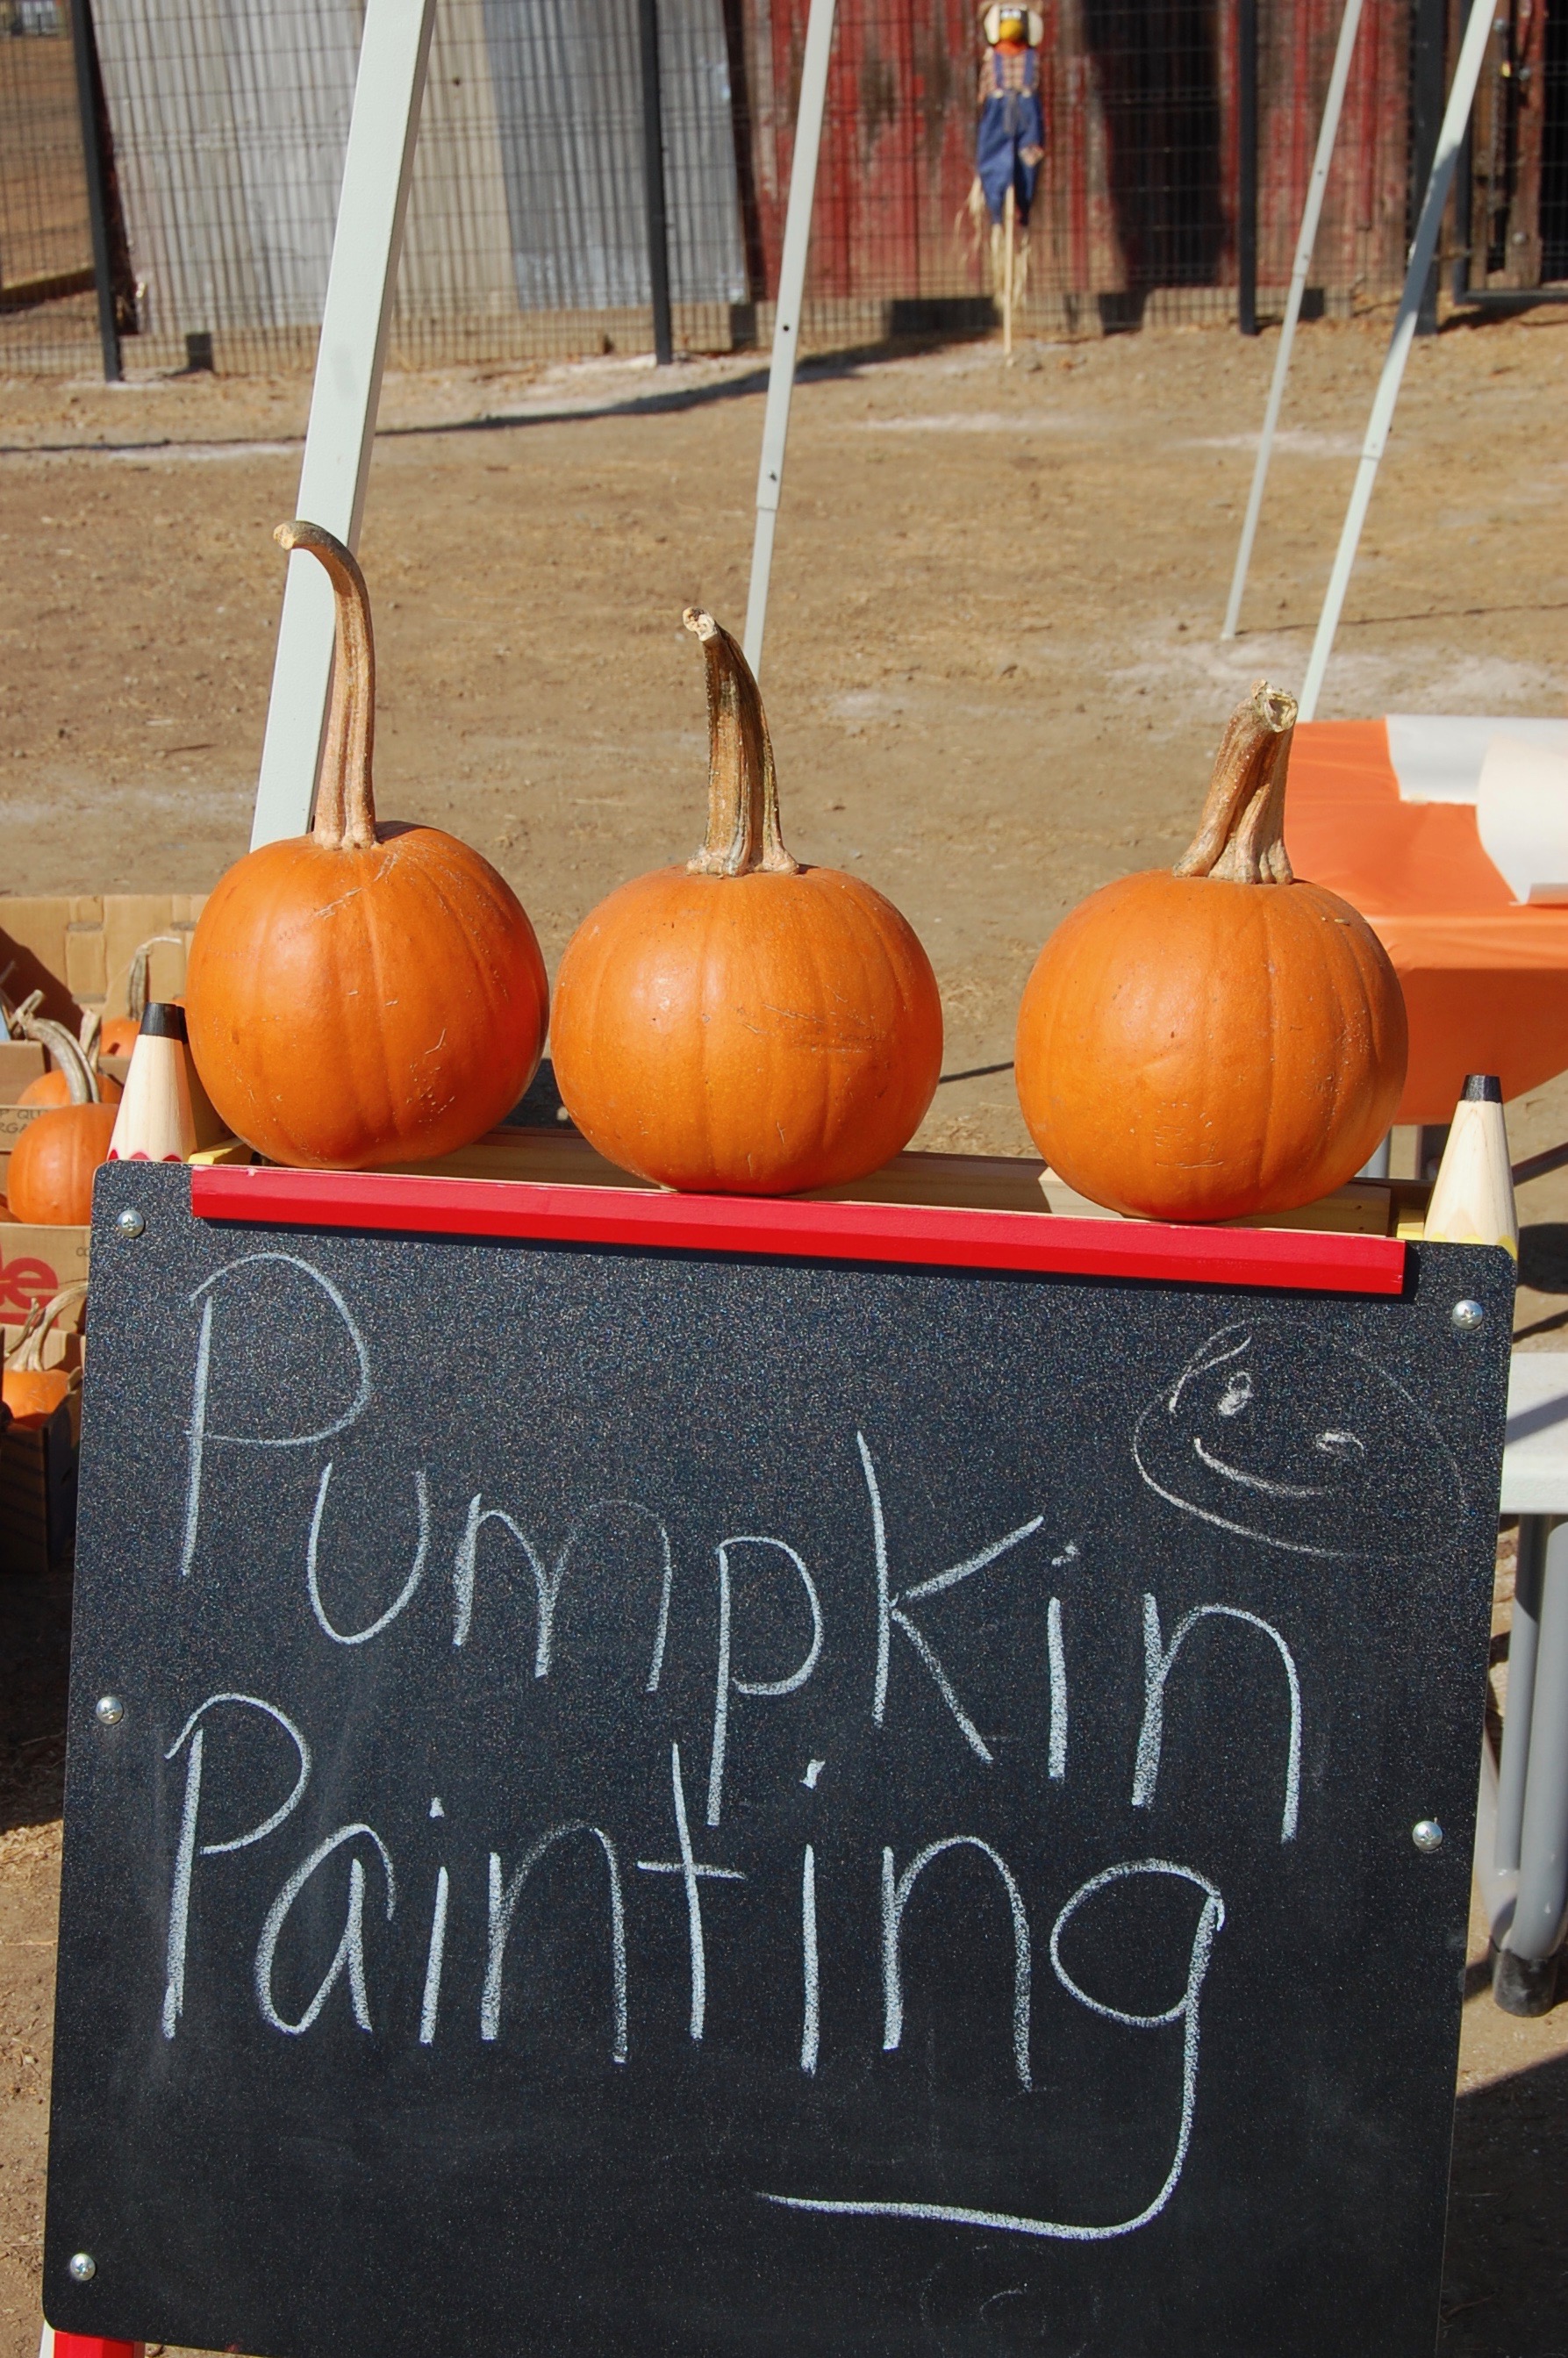 Pumpkin painting was another popular stop for all of the kids.